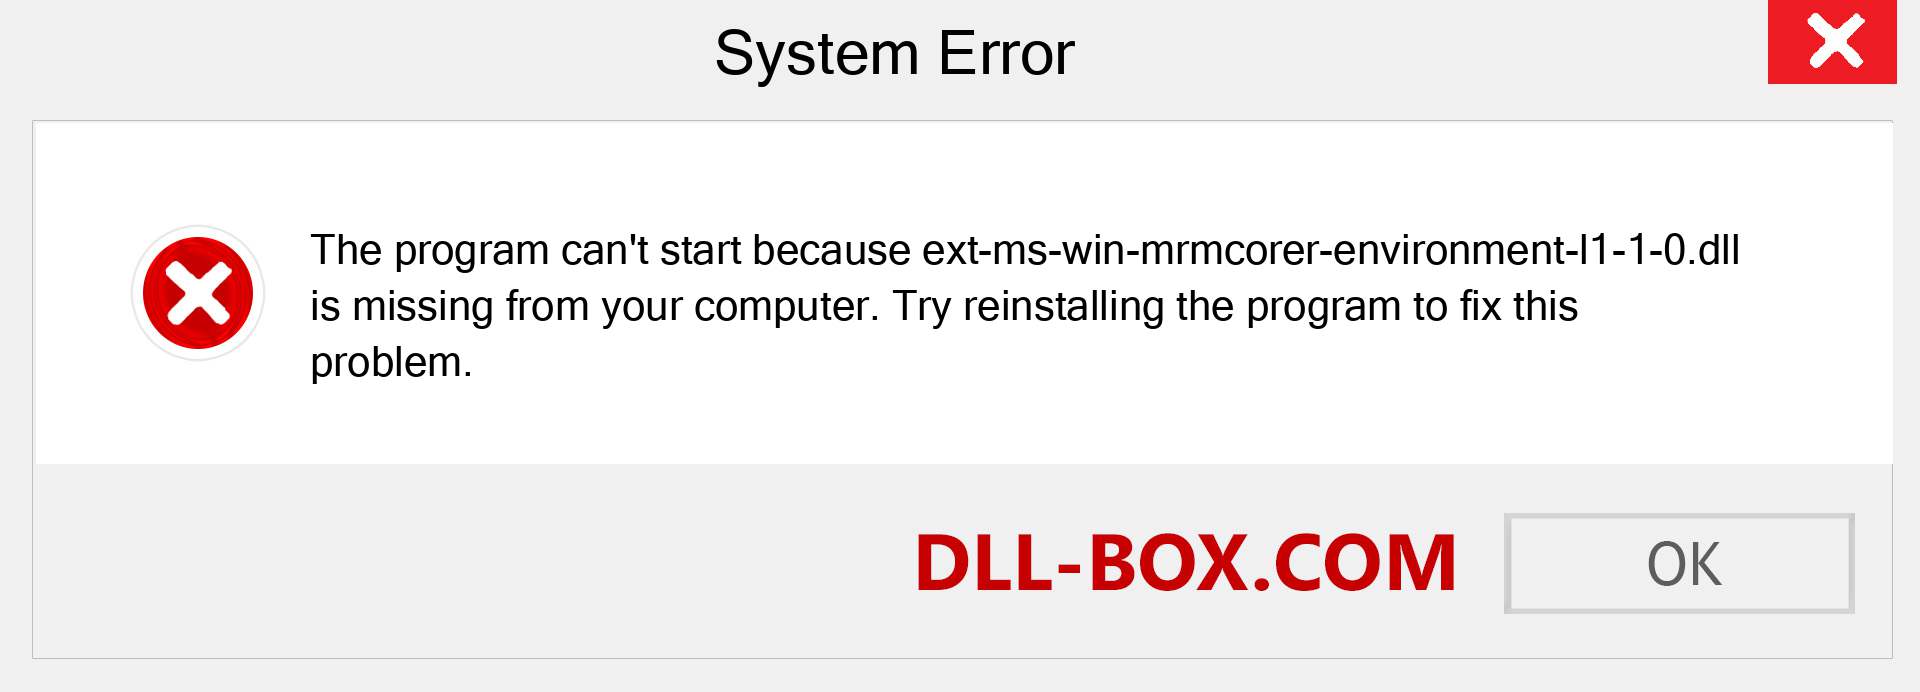  ext-ms-win-mrmcorer-environment-l1-1-0.dll file is missing?. Download for Windows 7, 8, 10 - Fix  ext-ms-win-mrmcorer-environment-l1-1-0 dll Missing Error on Windows, photos, images